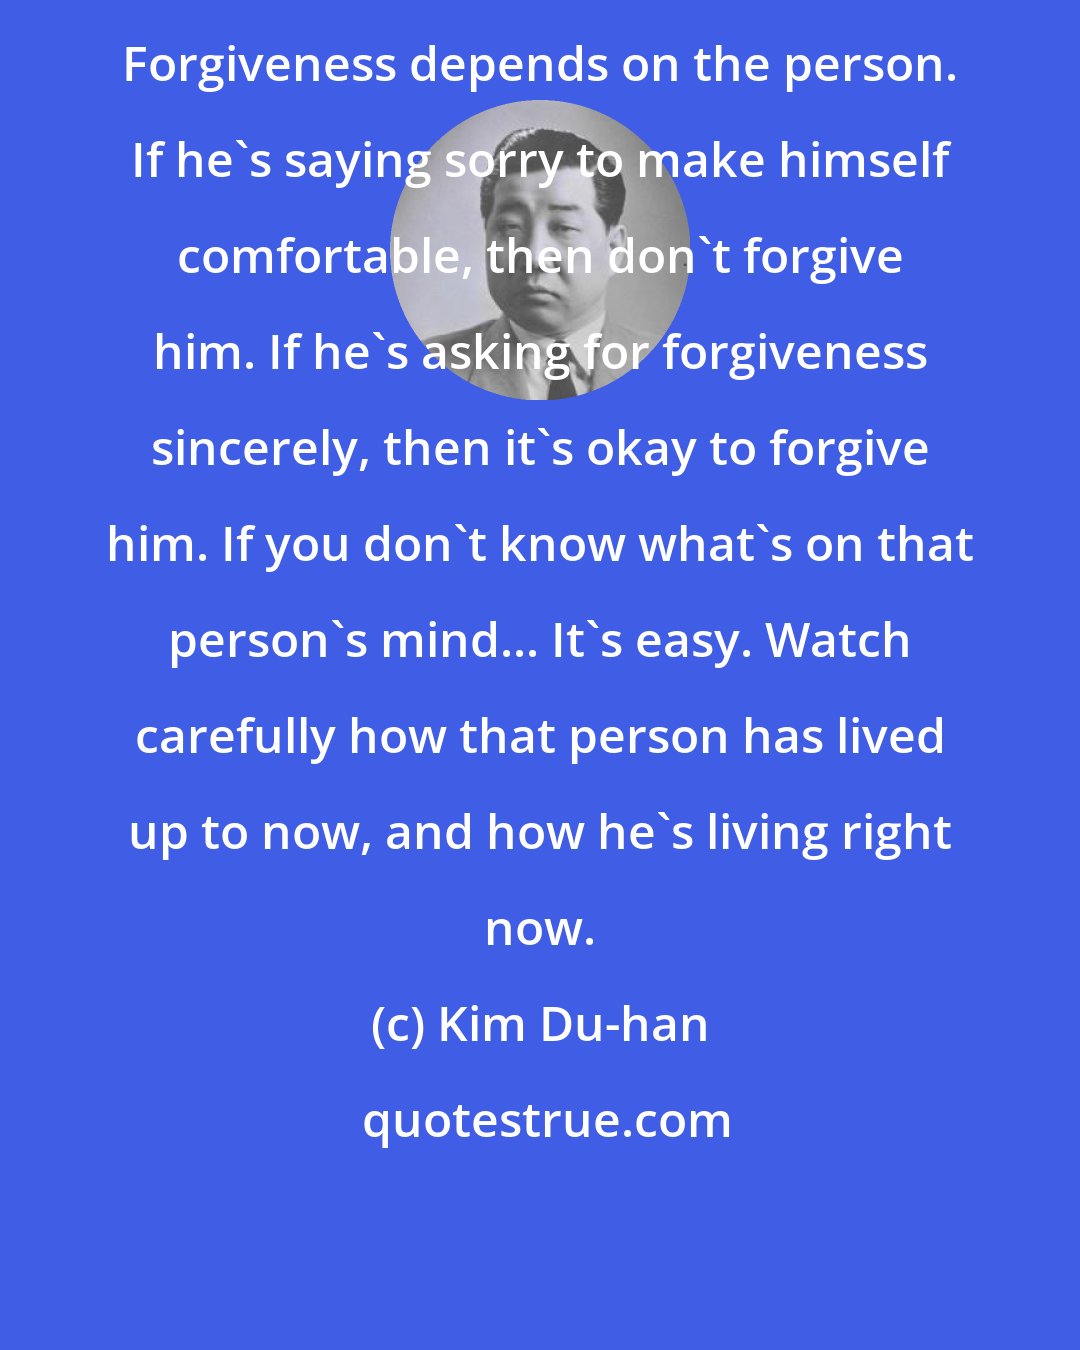 Kim Du-han: Forgiveness depends on the person. If he's saying sorry to make himself comfortable, then don't forgive him. If he's asking for forgiveness sincerely, then it's okay to forgive him. If you don't know what's on that person's mind... It's easy. Watch carefully how that person has lived up to now, and how he's living right now.